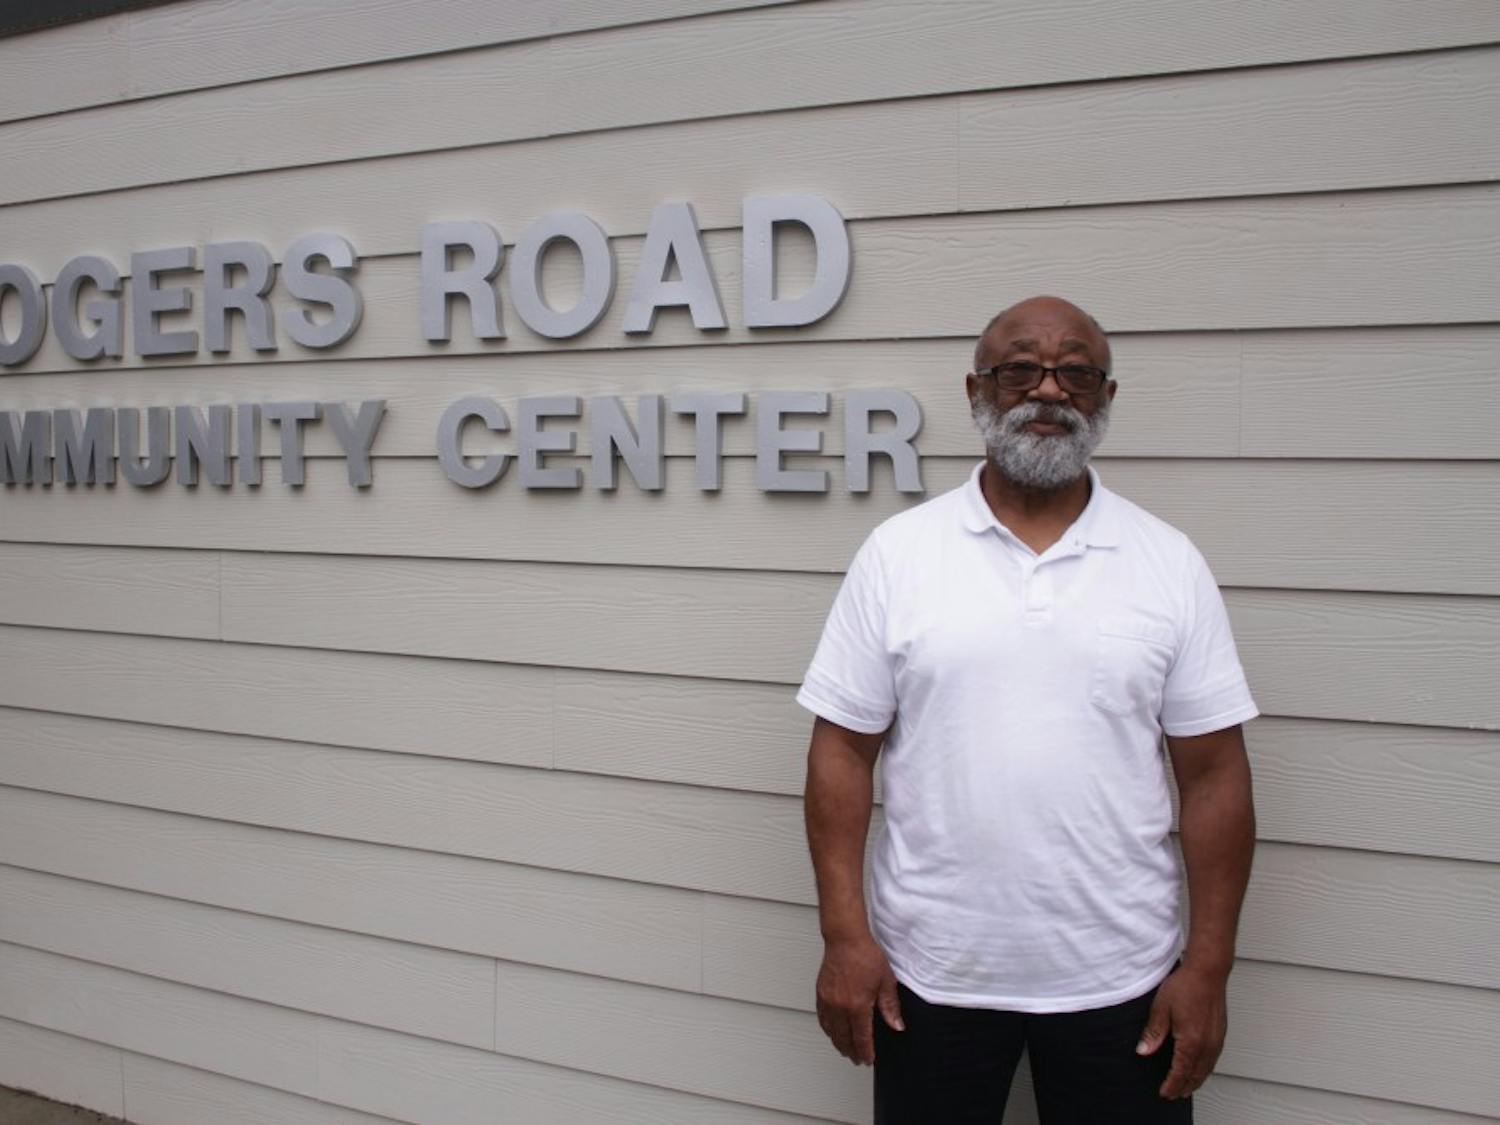 Rev. Campbell poses for a portrait in front of the Rogers Road Community Center.